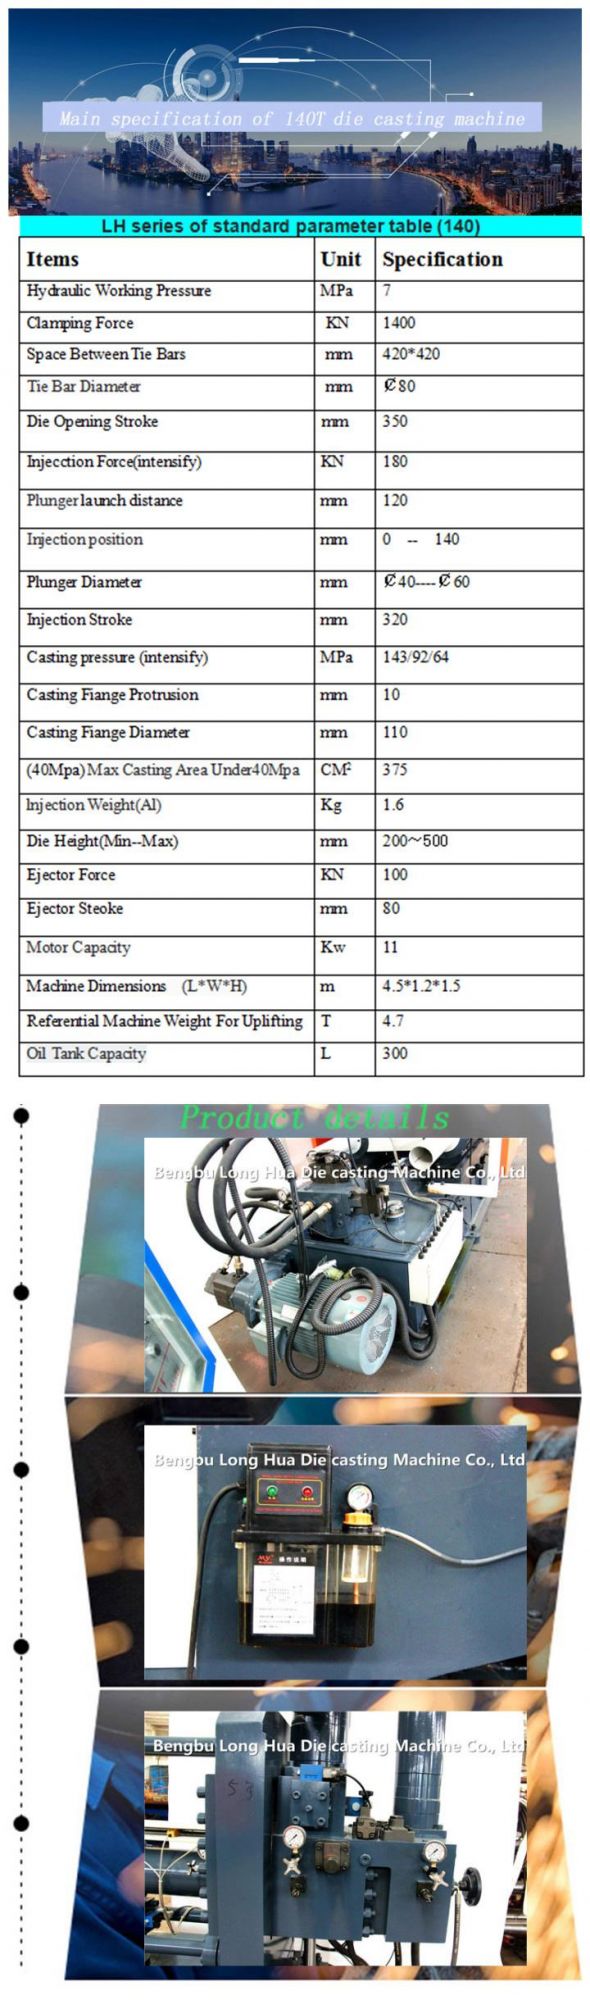 Zamak Cold Chamber Die Casting Process Machine for Making Zinc Aluminum Brass Copper Productions